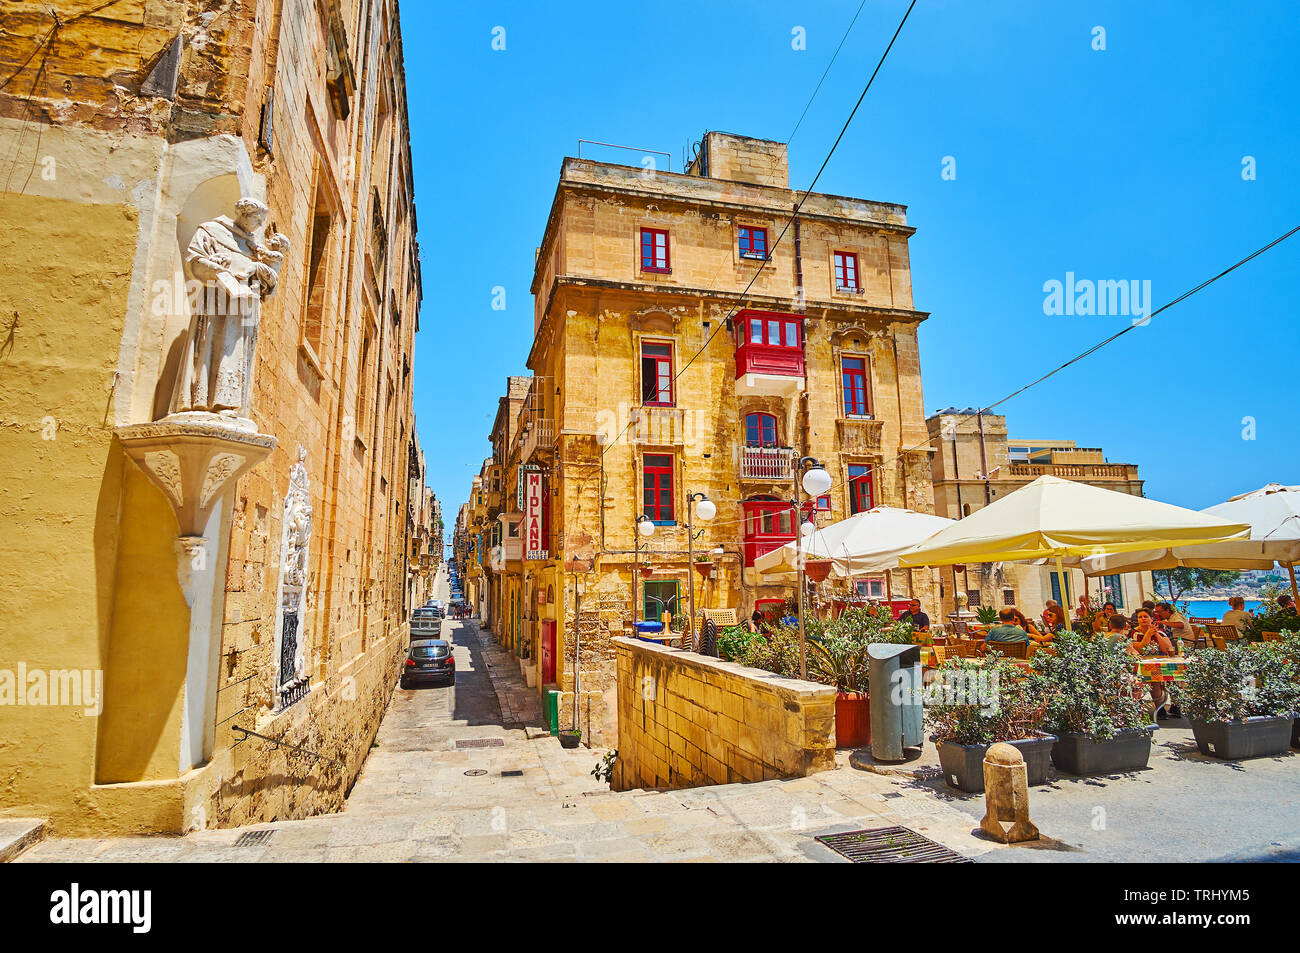 VALLETTA, MALTA - JUNE 19, 2018: St Ursula street is one of the medieval city streets with historical housing, outdoor cafes, wall statues and interes Stock Photo